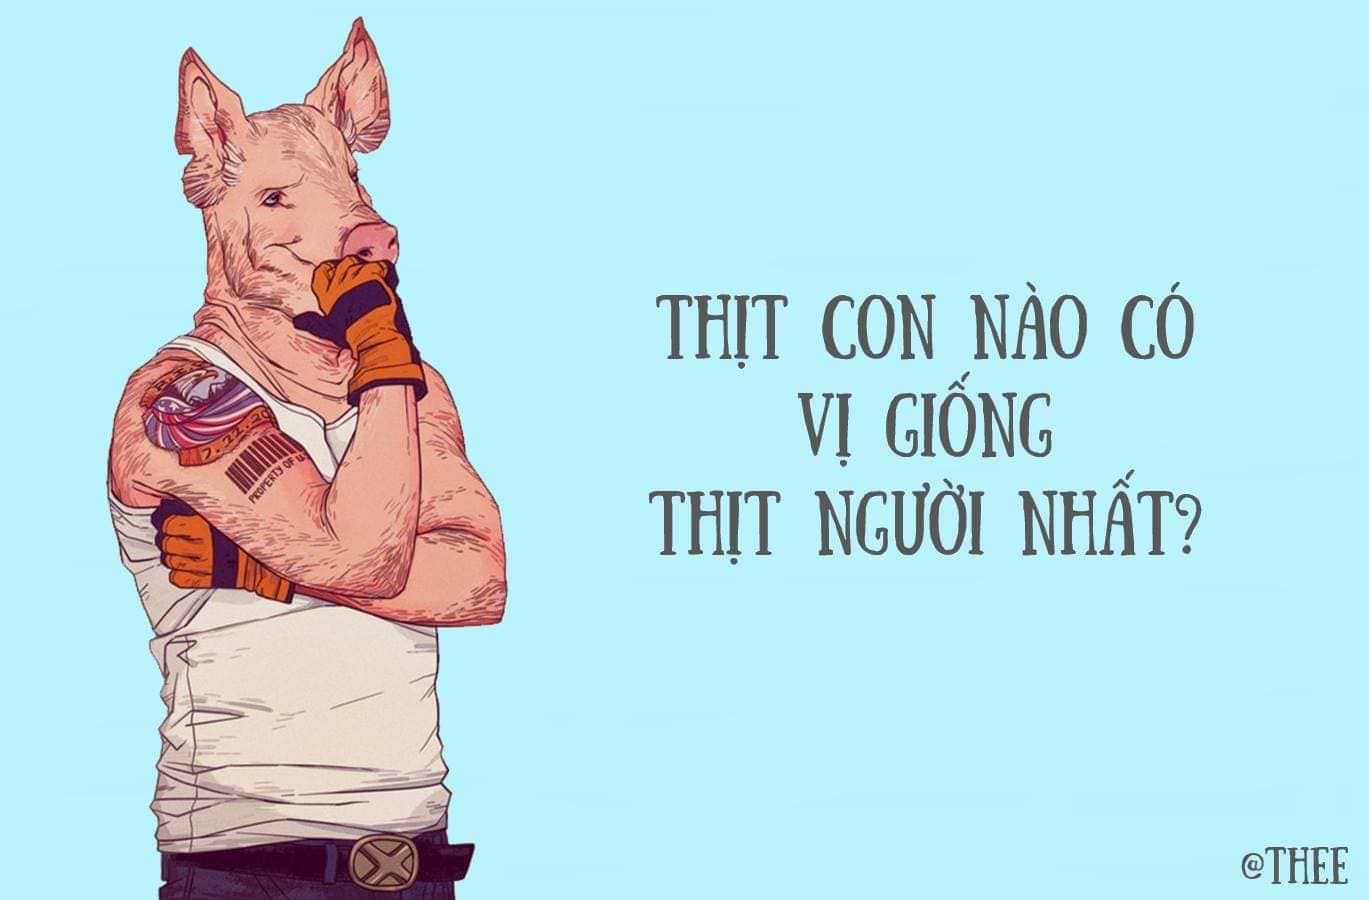 Thit con nao co vi giong thit nguoi nhat